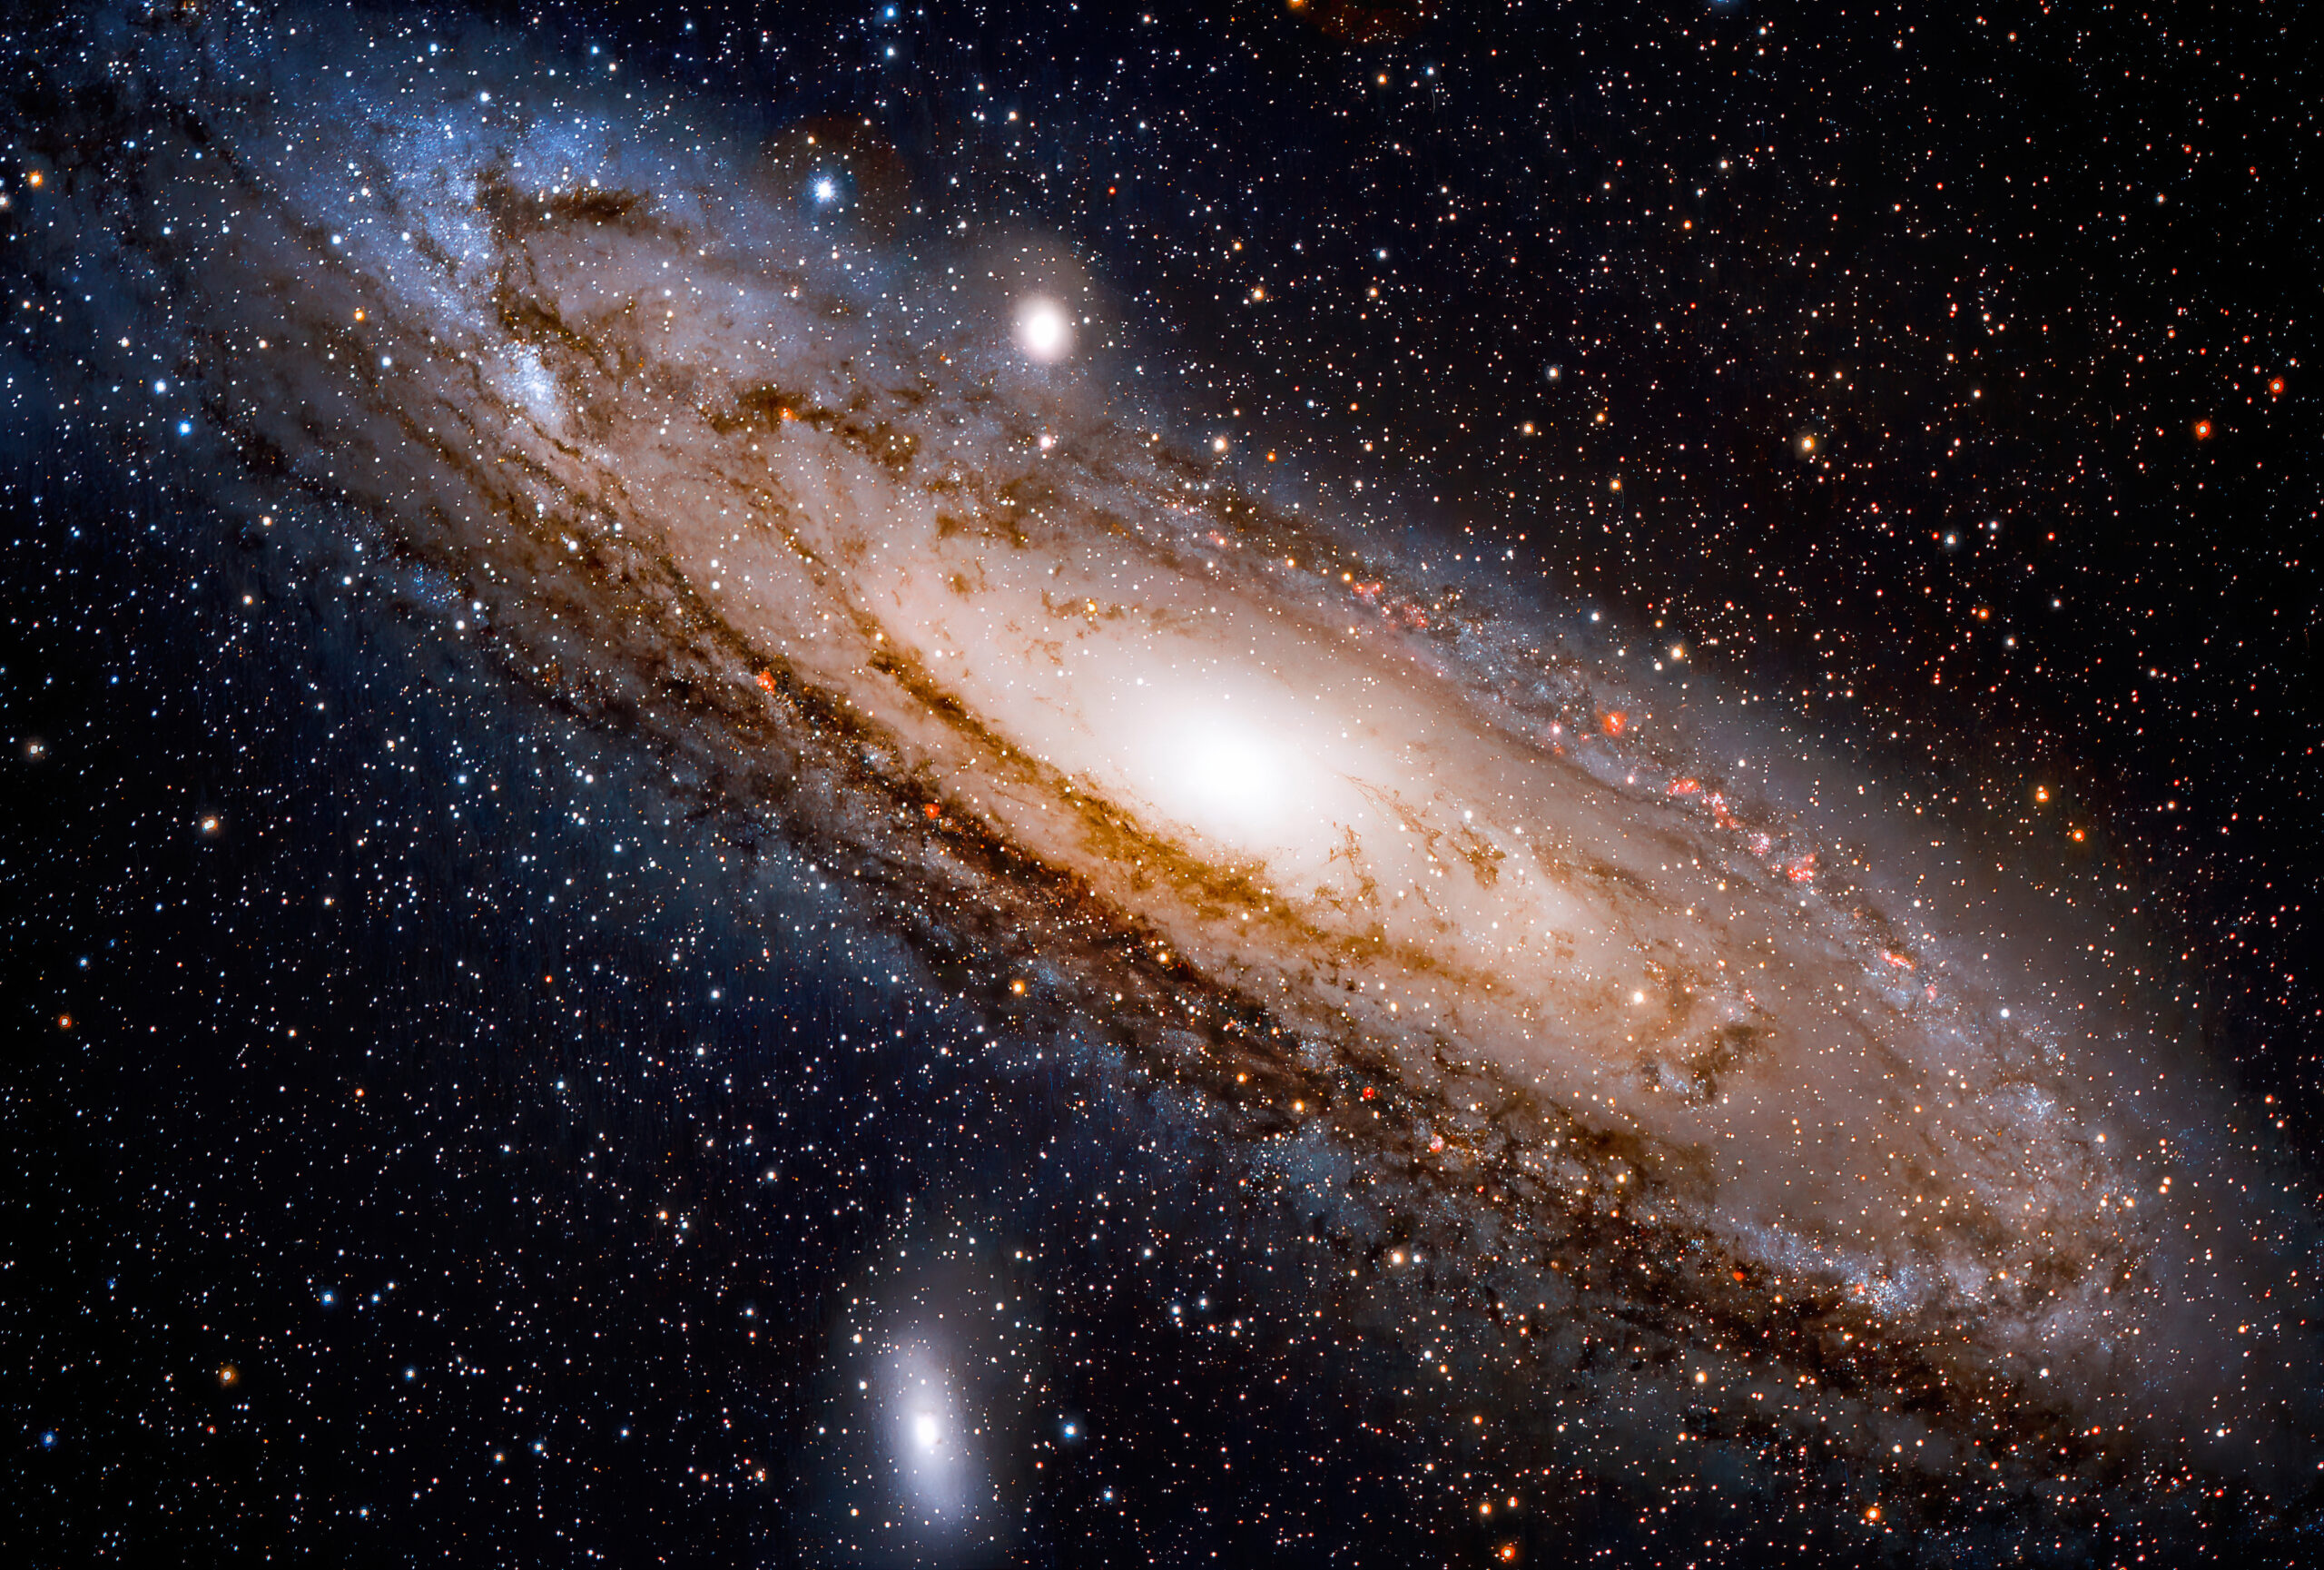 2 billion years ago, the Andromeda galaxy collapse led to a massive cosmic migration.